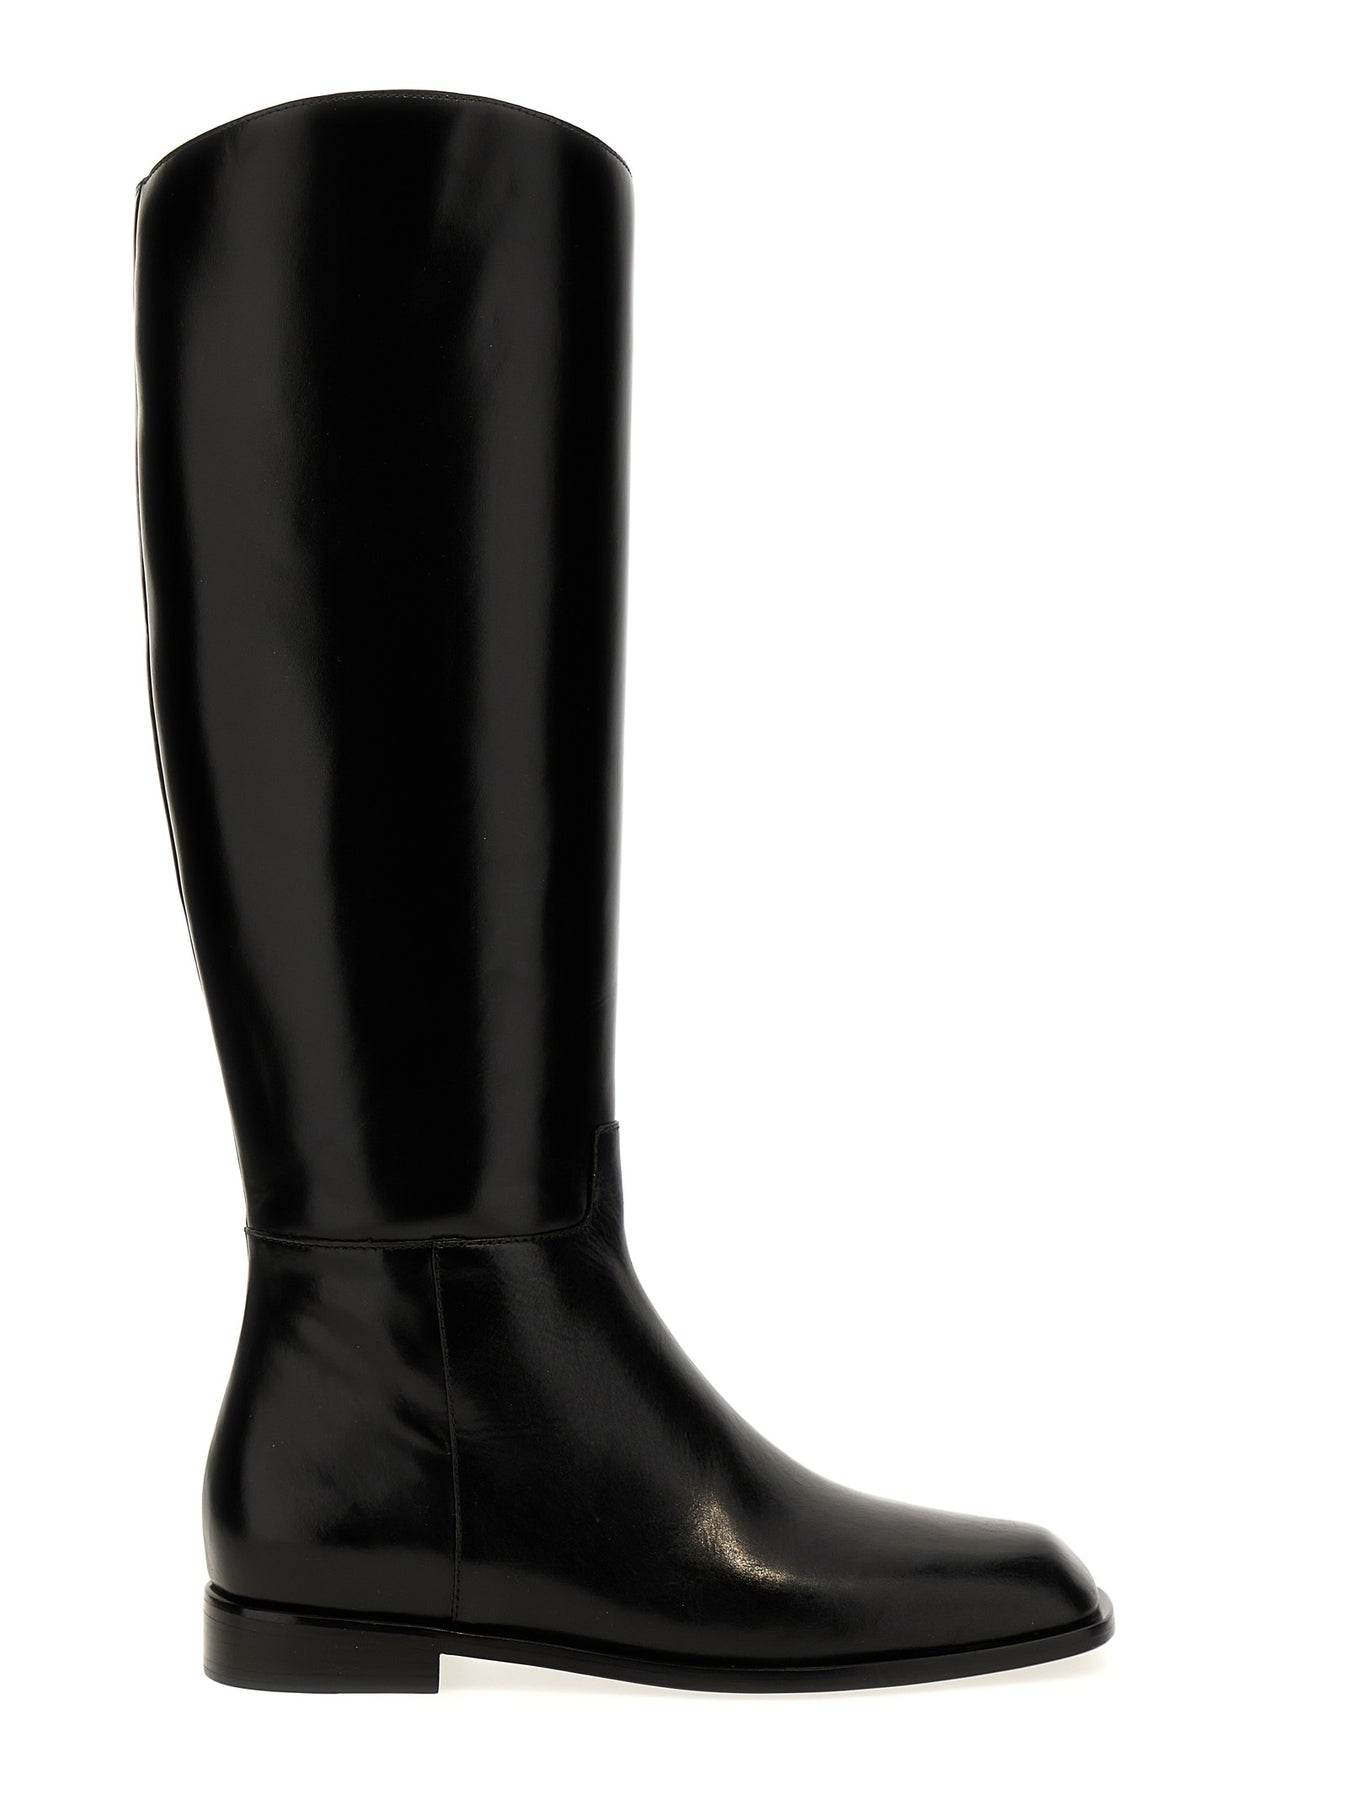 Shop Tory Burch Jessa Riding Boot Boots, Ankle Boots